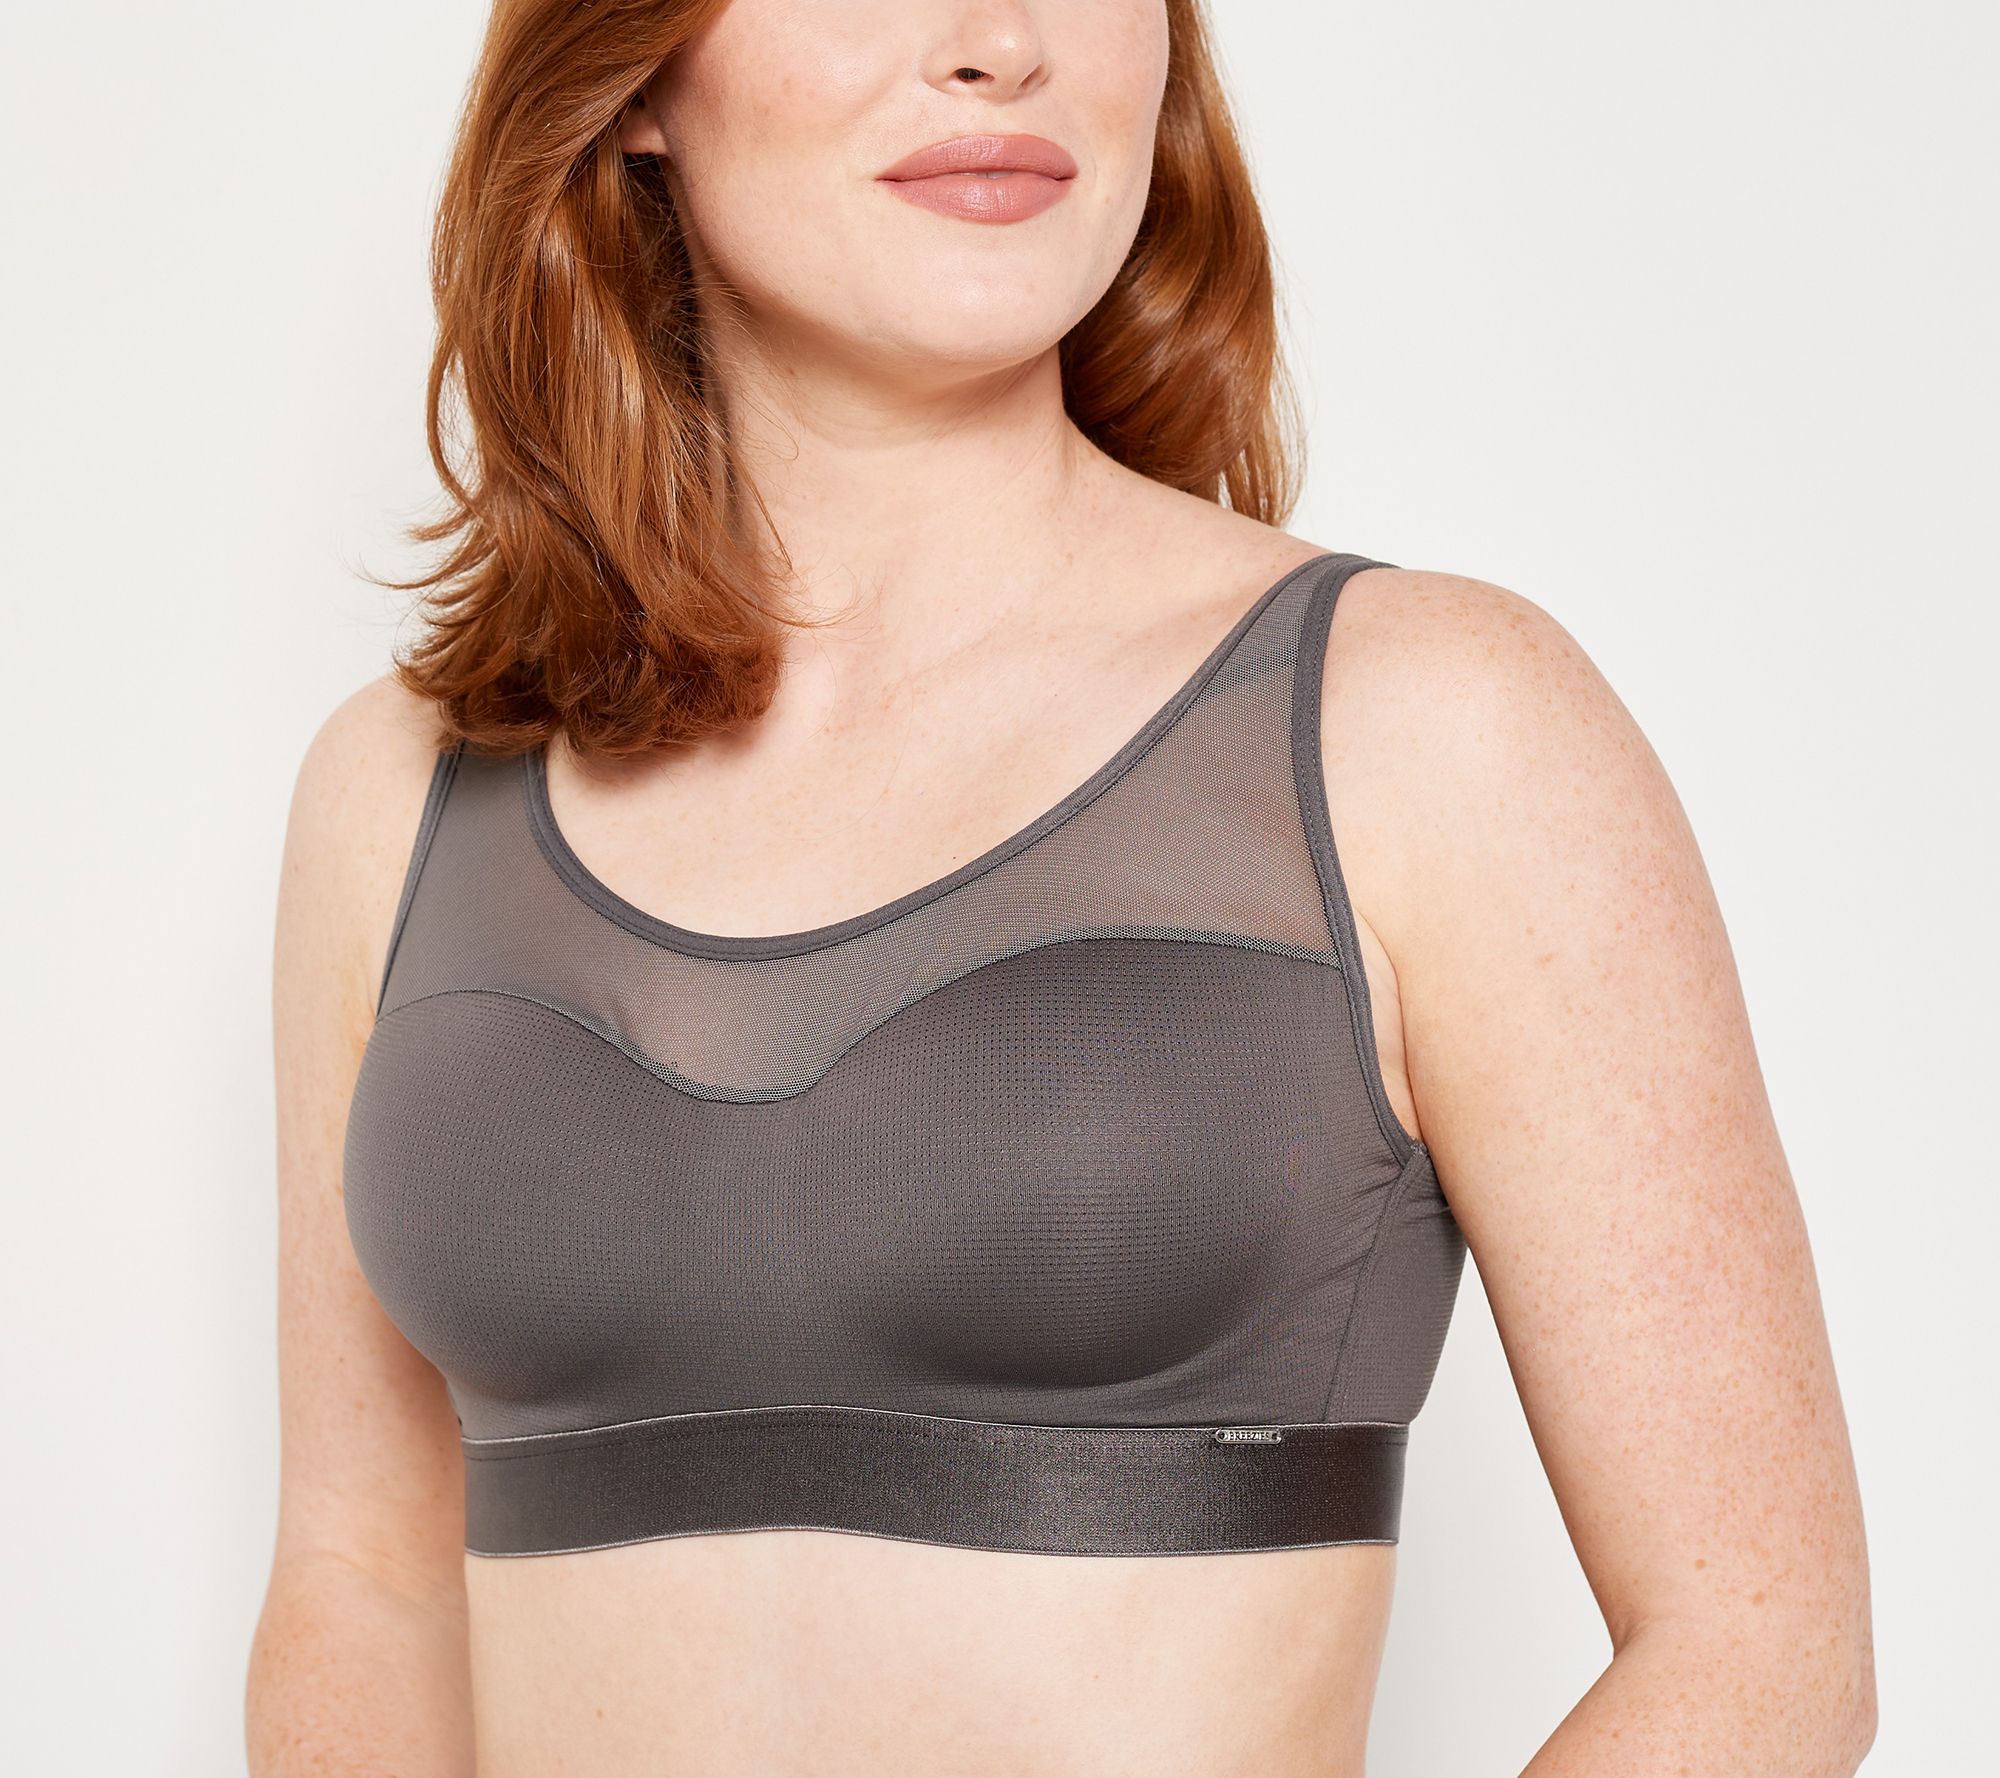 Breezies Bra, UltimAir lining helps transport sweat and moisture away from  body Keeping You Cooler, Drier, More Confident.